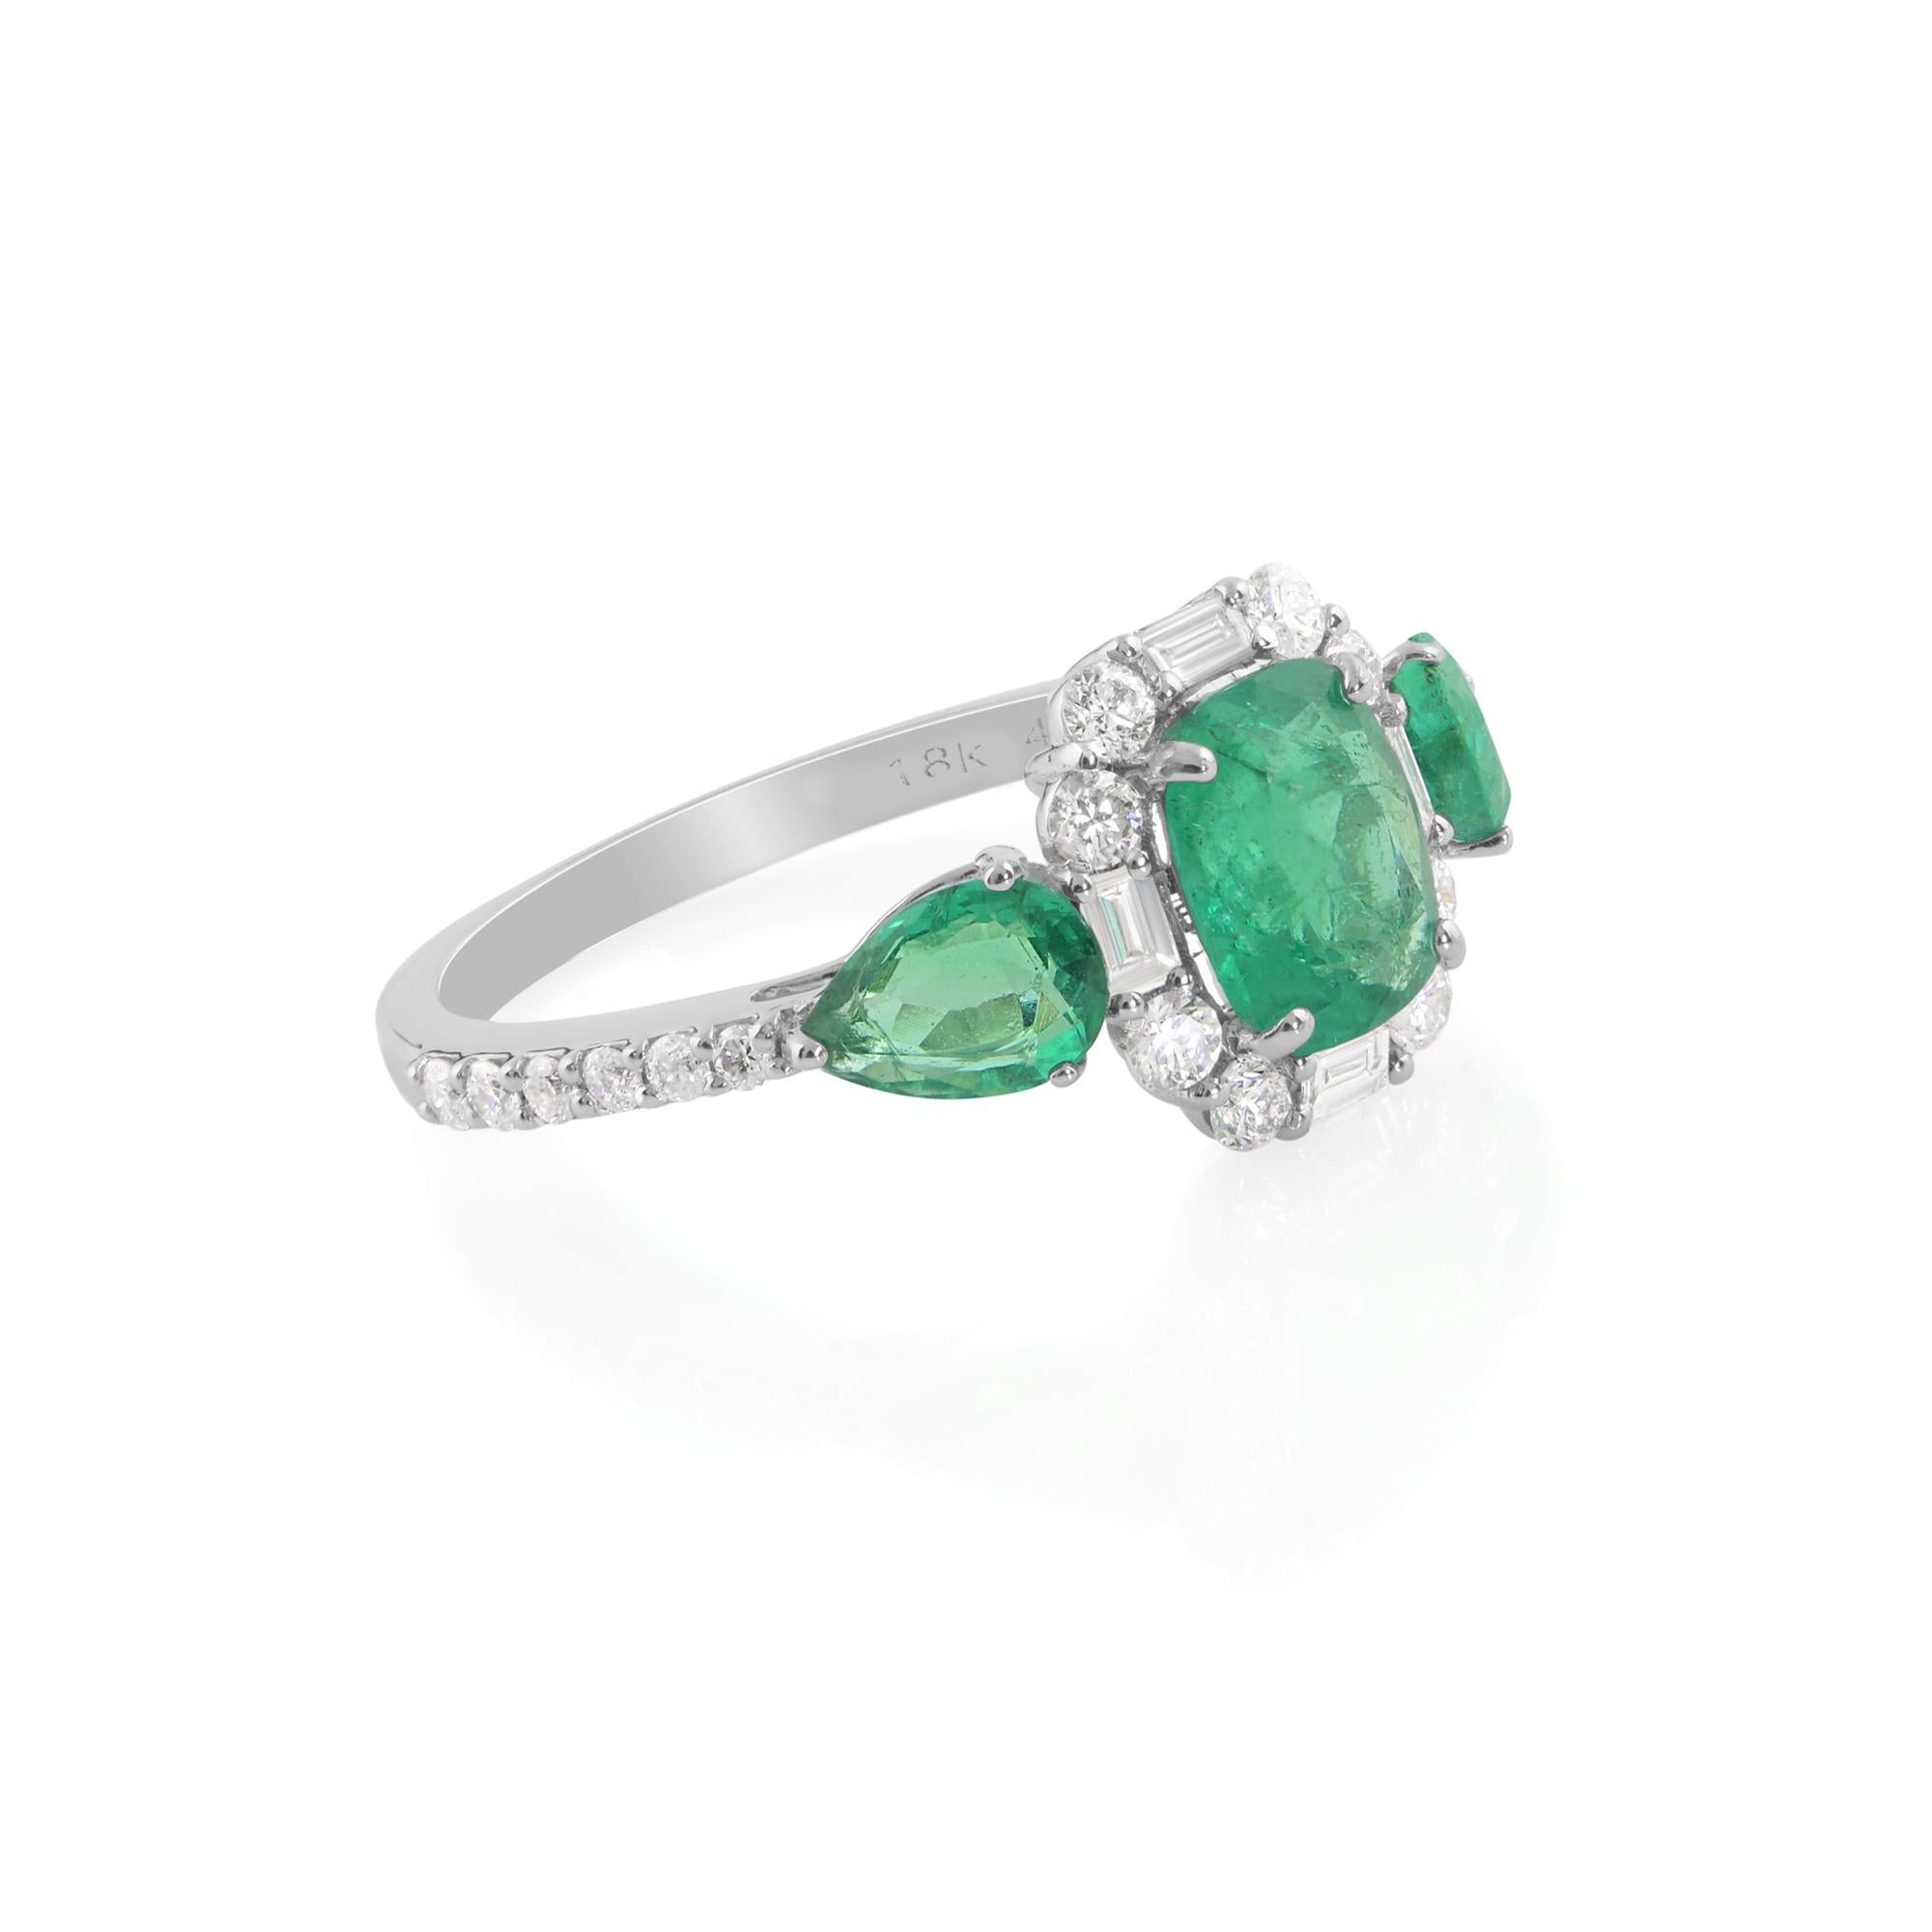 Whether worn as a statement piece for a special occasion or as an everyday indulgence, this Zambian Emerald Gemstone Ring is sure to captivate hearts and minds alike, leaving a lasting impression wherever you go. Revel in the timeless allure of